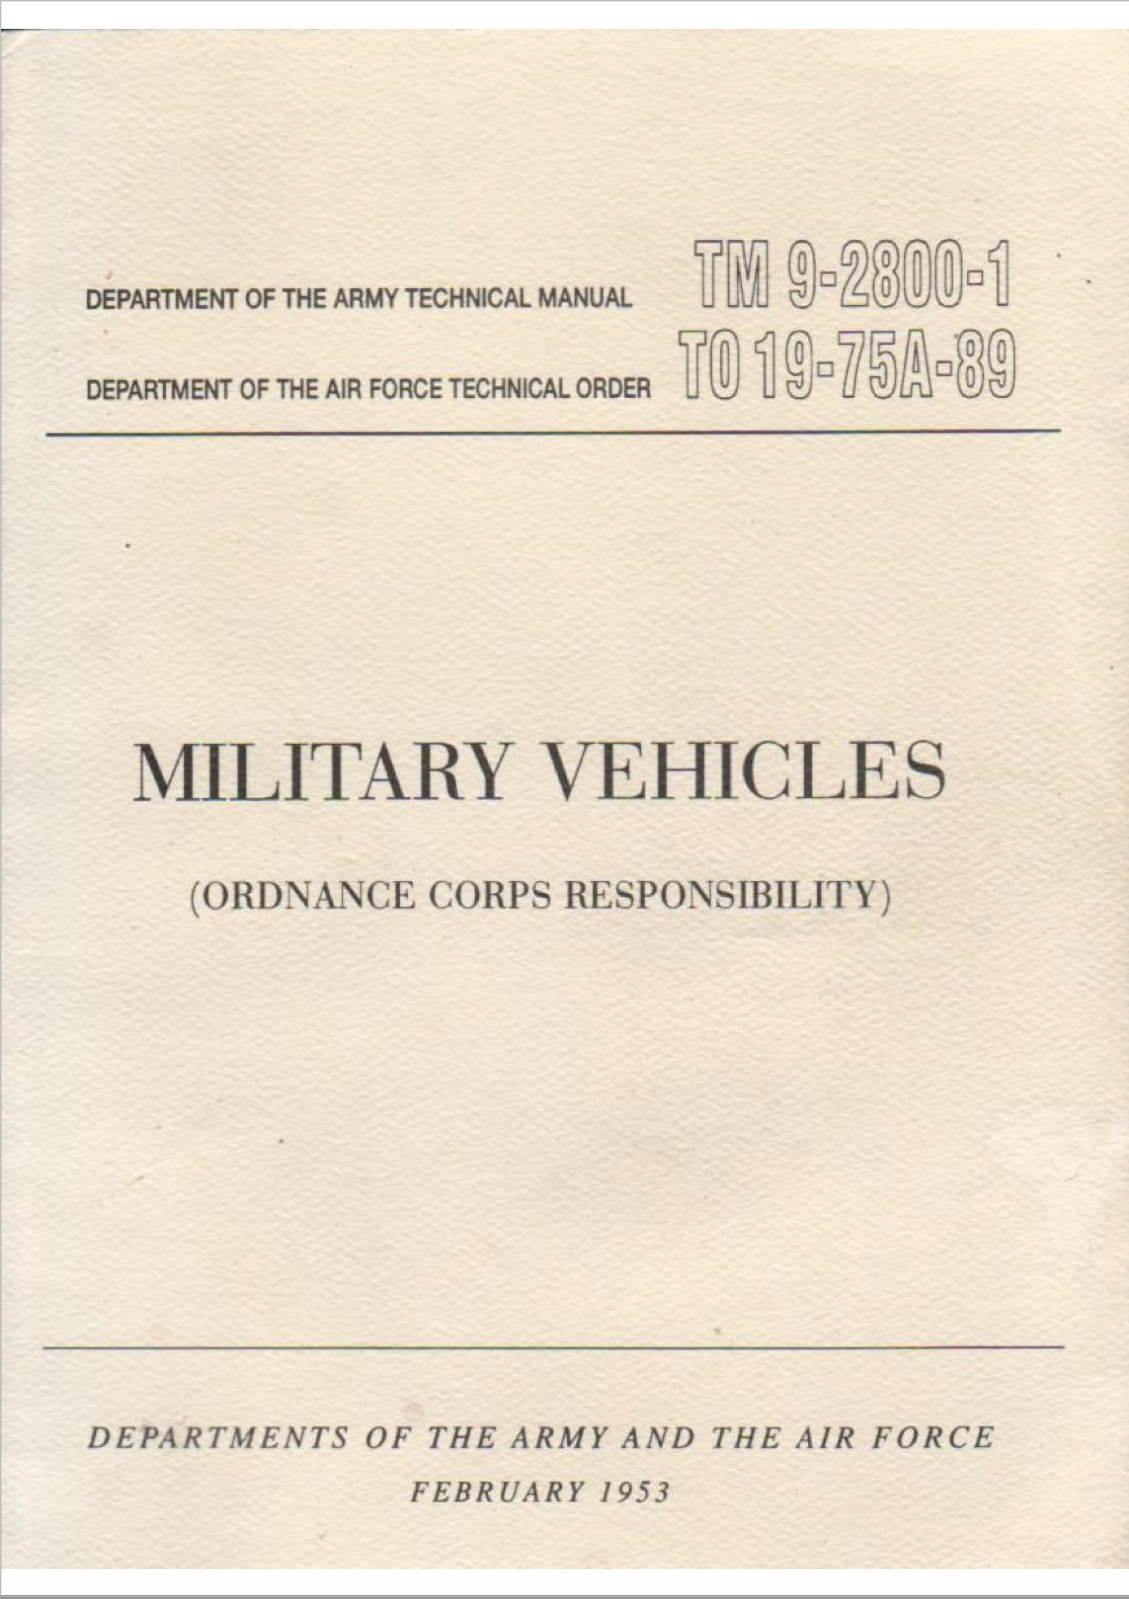 341 Page 1953 POST WAR VEHICLES TM 9-2800-1 TO 19-75A-89  Technical Manual on CD